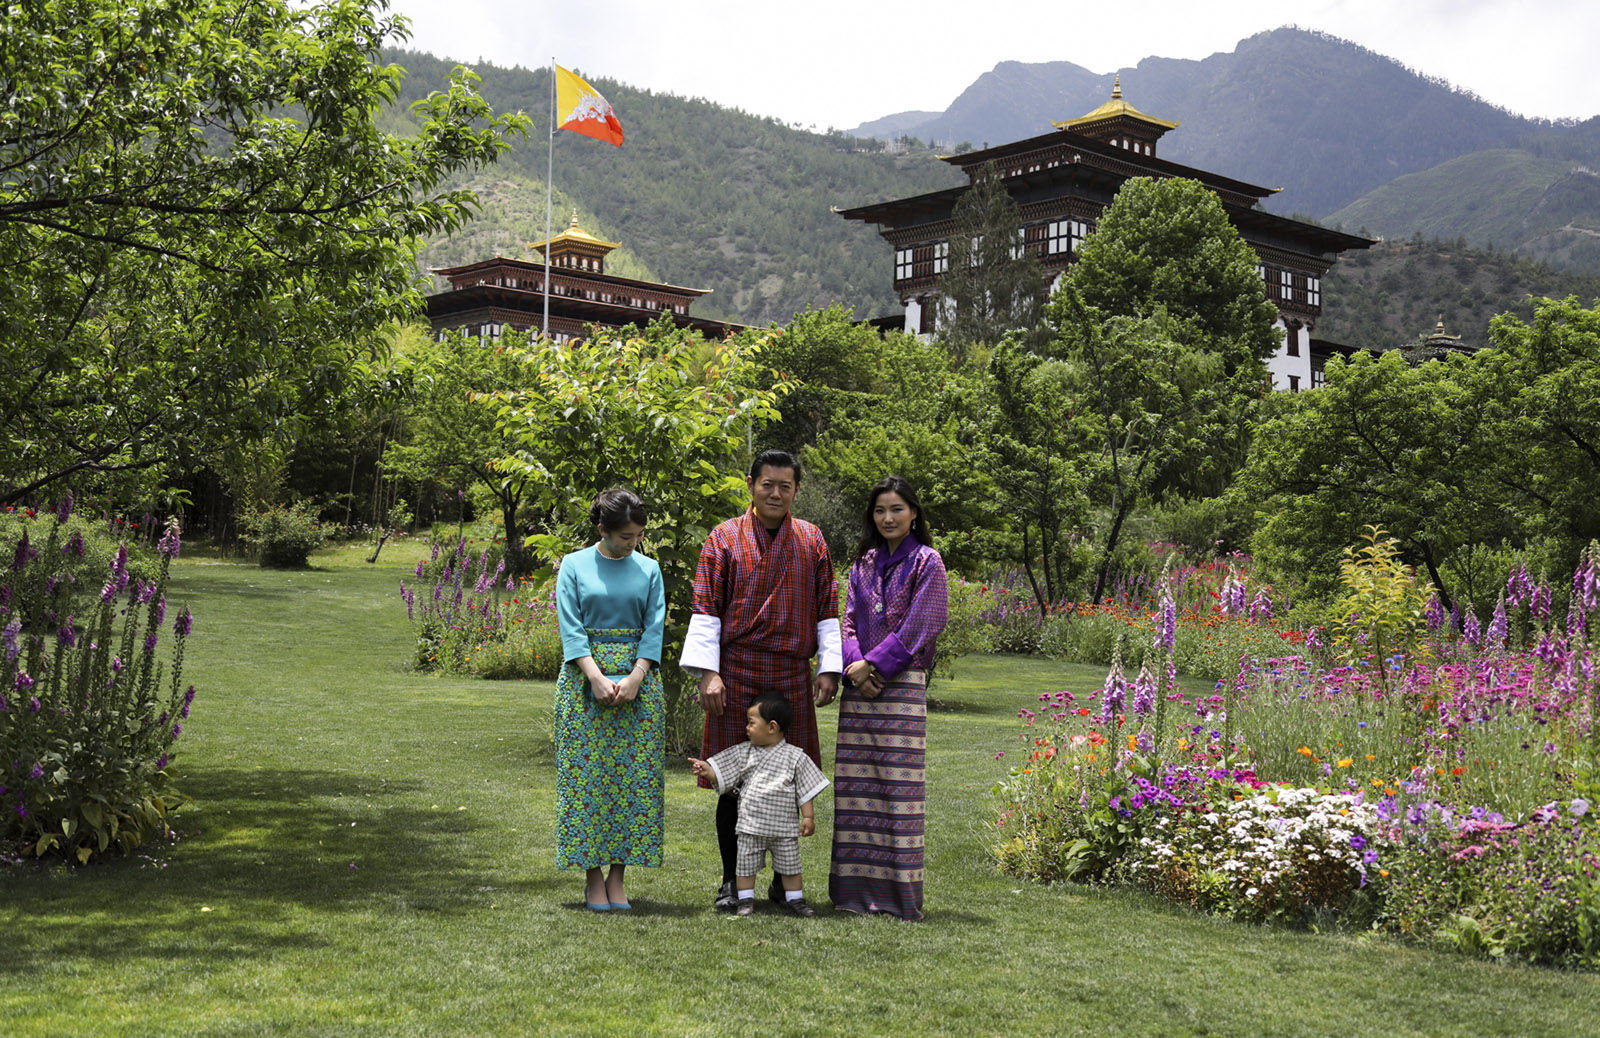 In this handout photograph released by Royal Office for Media Bhutan, Japan's Princess Mako, left, the granddaughter of Emperor Akihito, watches Jigme Namgyel Wangchuck son of Bhutan's King Jigme Khesar Namgyal Wangchuck, center, and Queen Jetsun Pema, right, as they pose for a photograph in Thimphu, Bhutan on Friday, June 2, 2017. (Royal Office for Media Bhutan via AP)